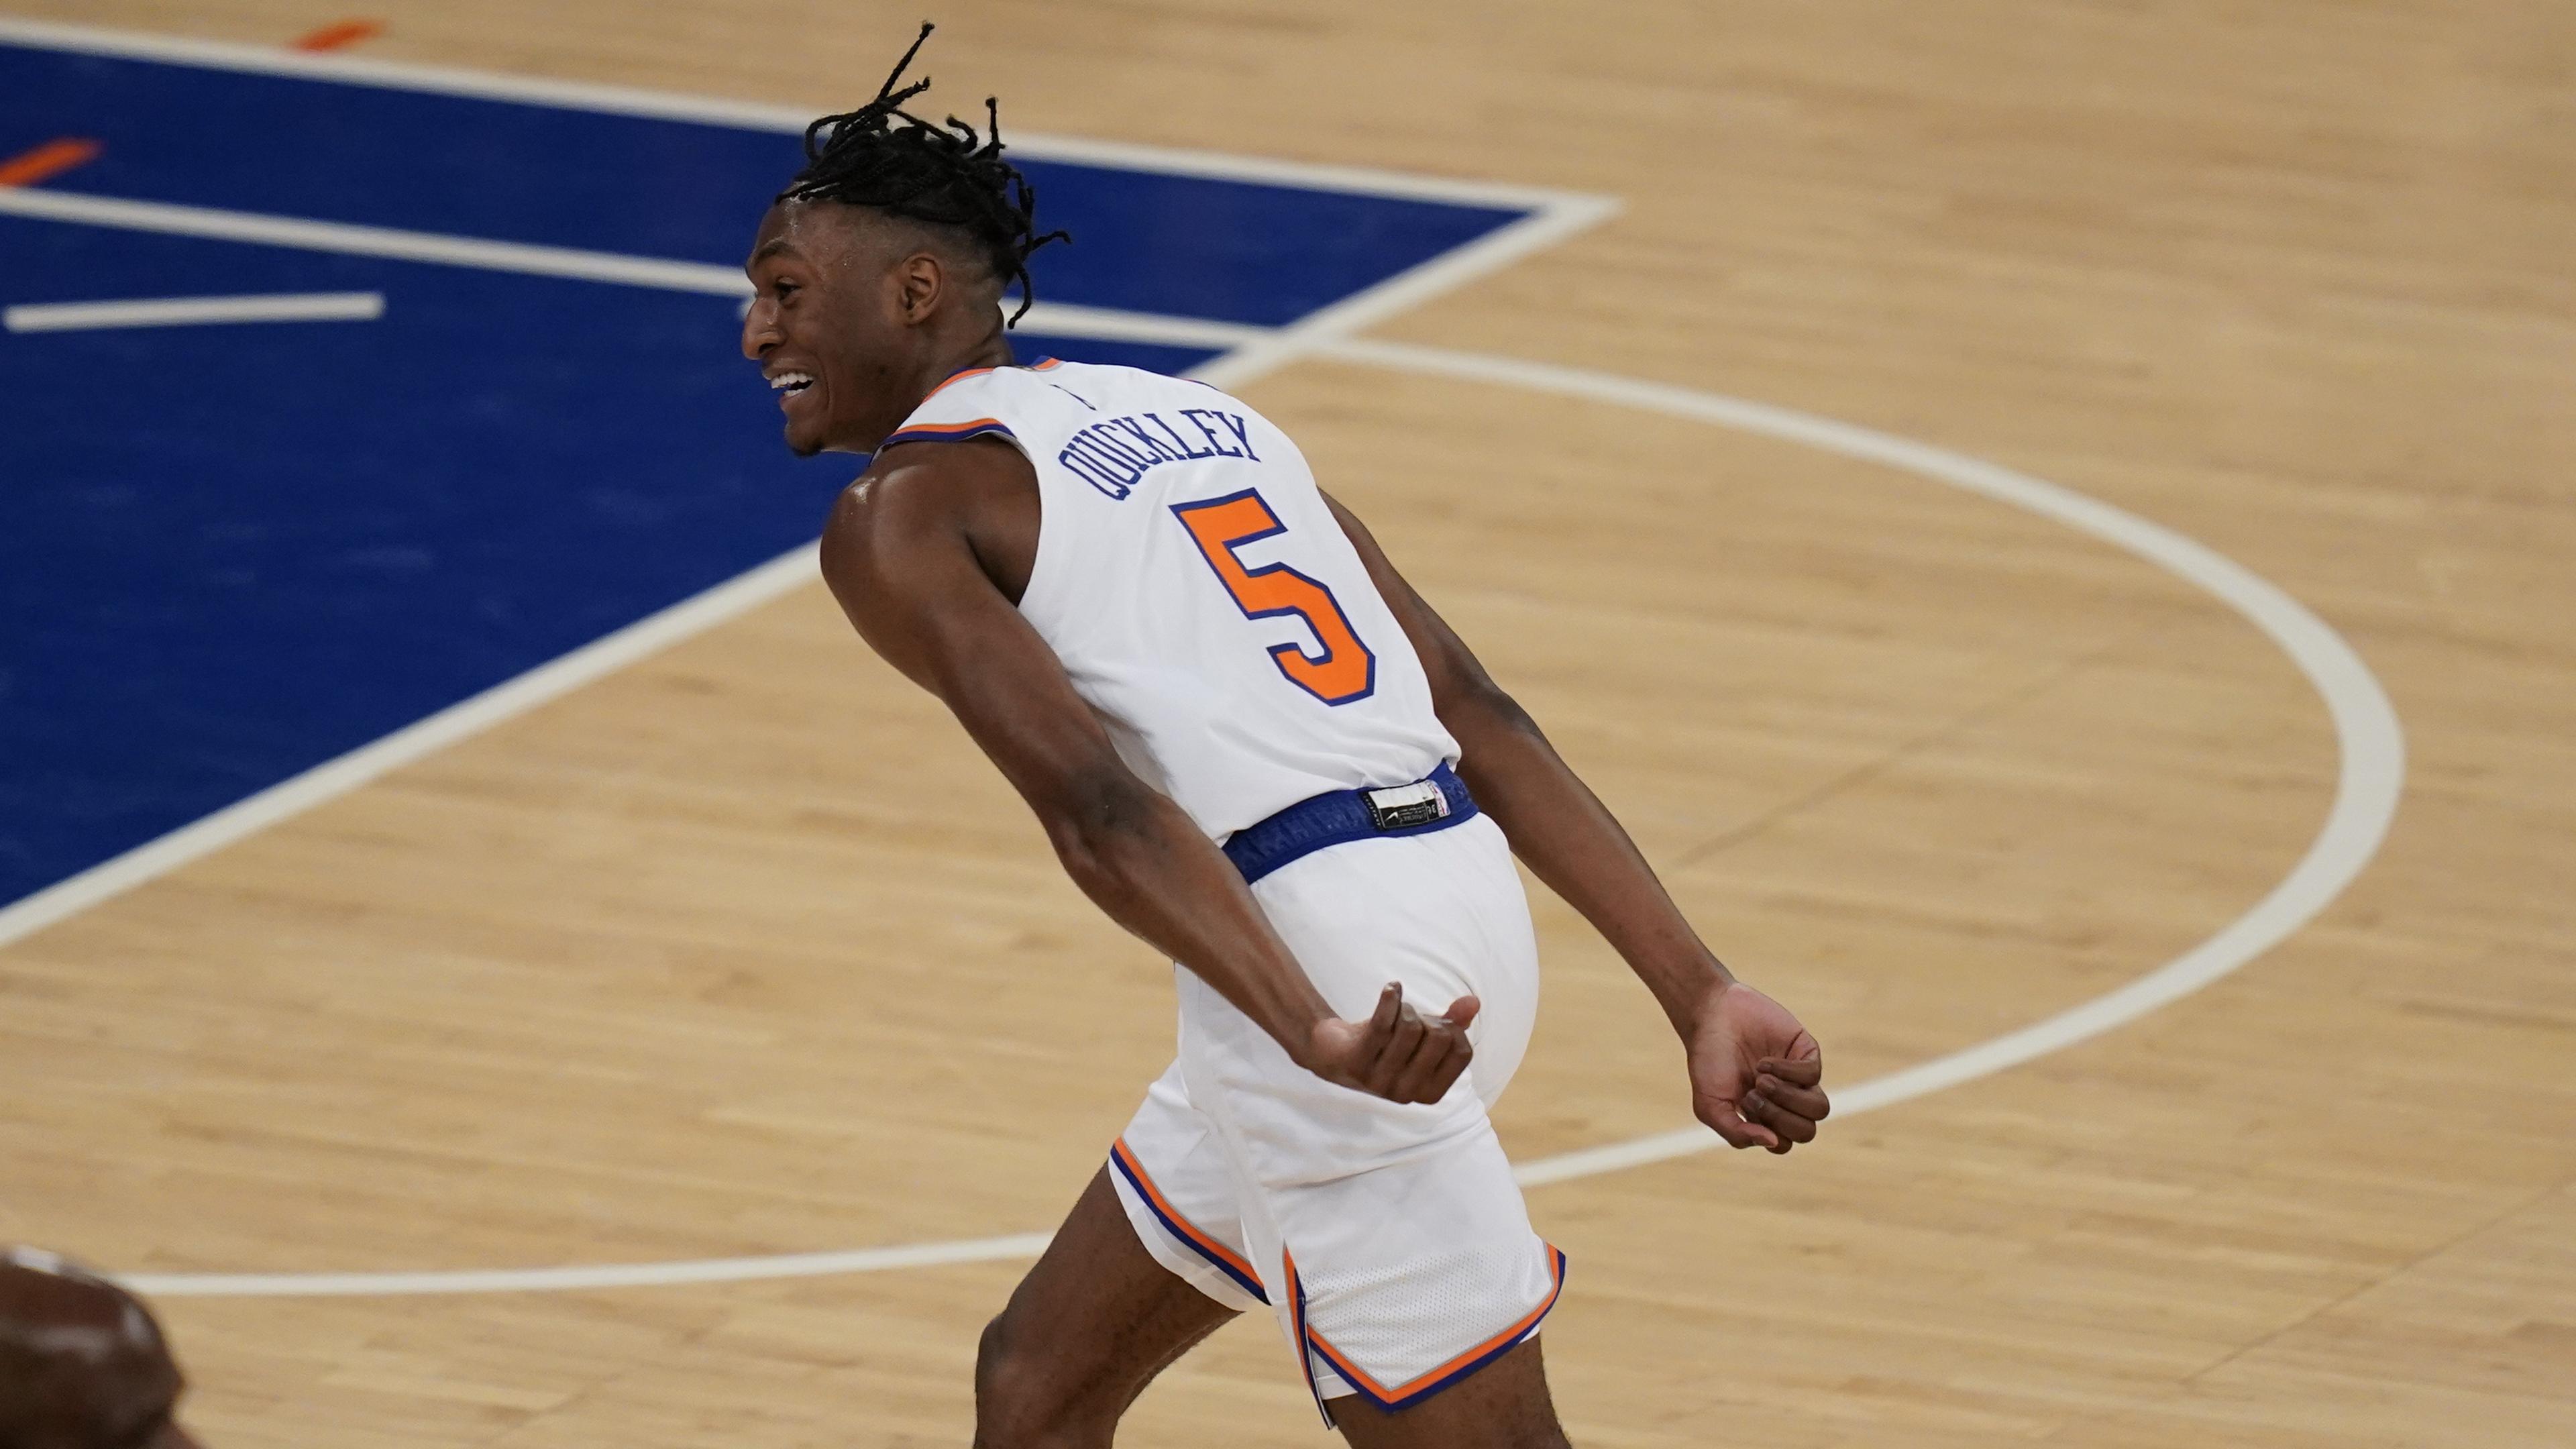 May 23, 2021; New York, New York, USA; New York Knicks guard Immanuel Quickley (5) celebrates a three-point basket during the first half in game one in the first round of the 2021 NBA Playoffs at Madison Square Garden / © Pool Photo-USA TODAY Sports